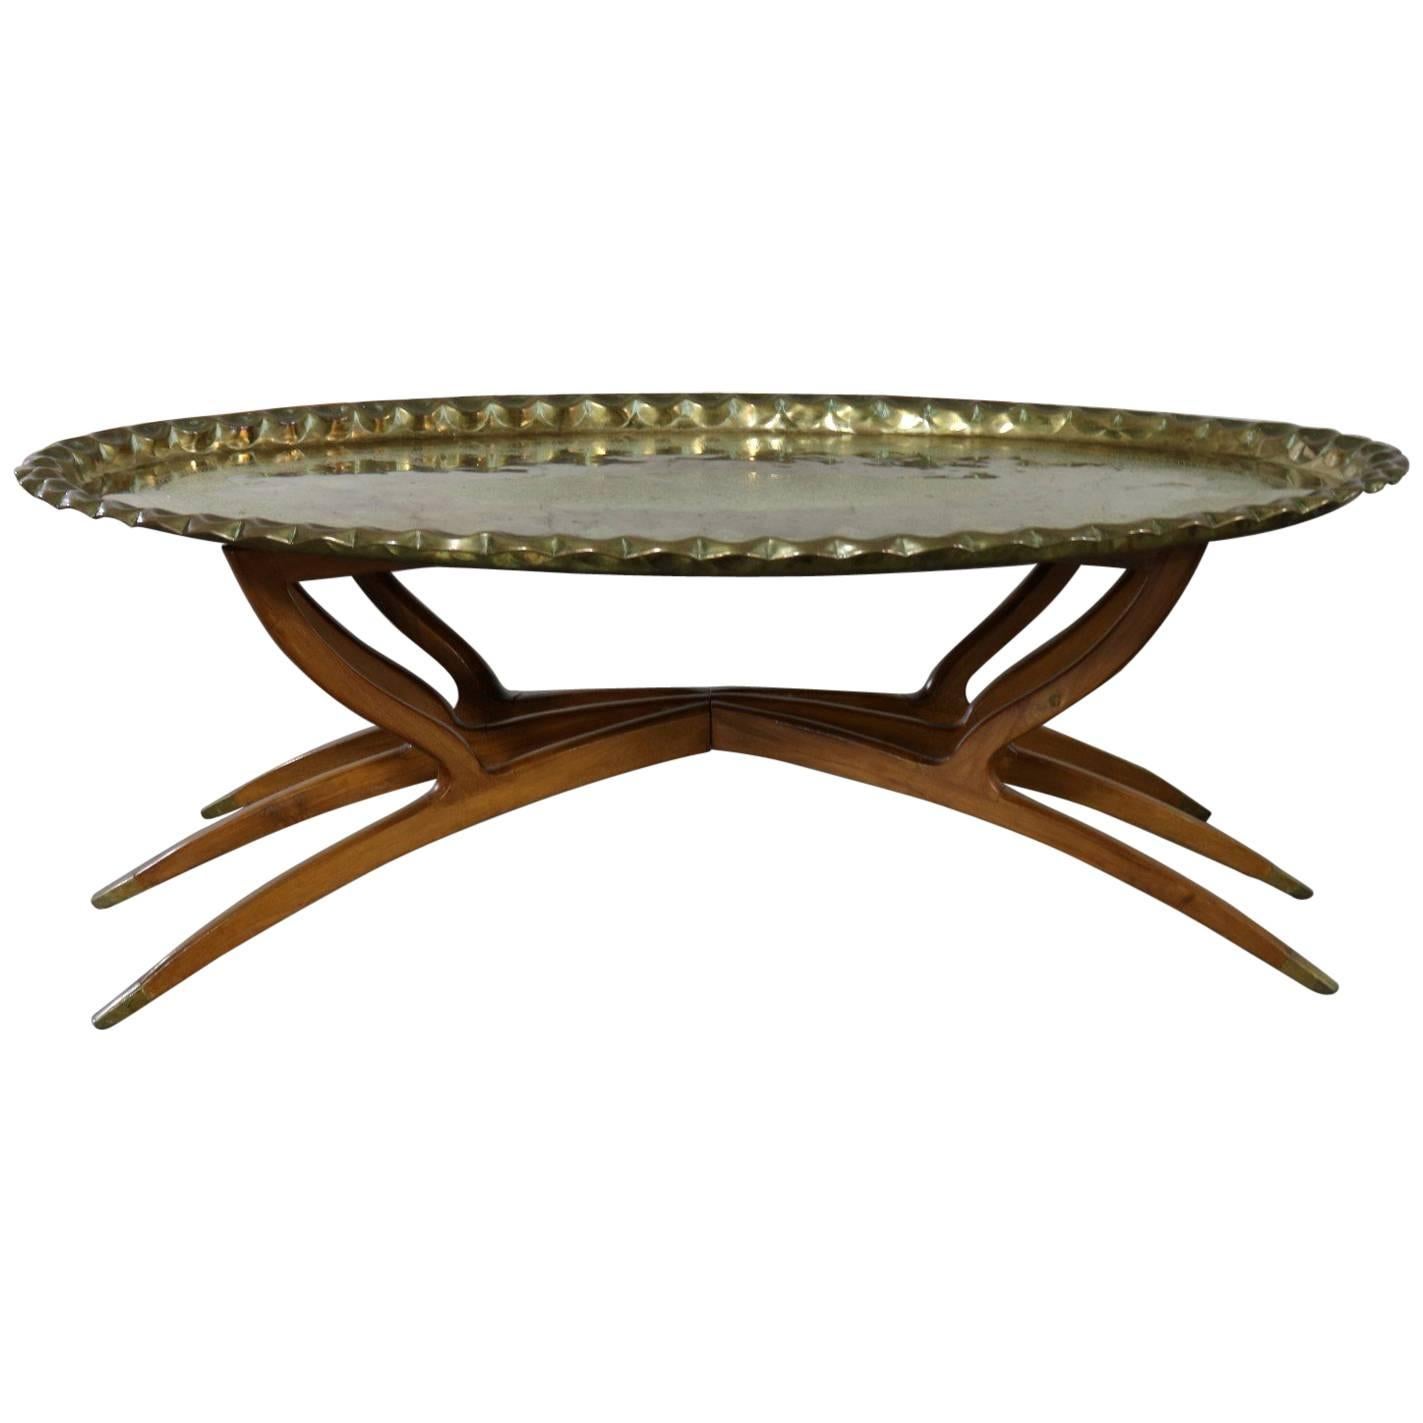 Vintage Indian Moroccan Style Oval Tray Top Spider Leg Coffee Table